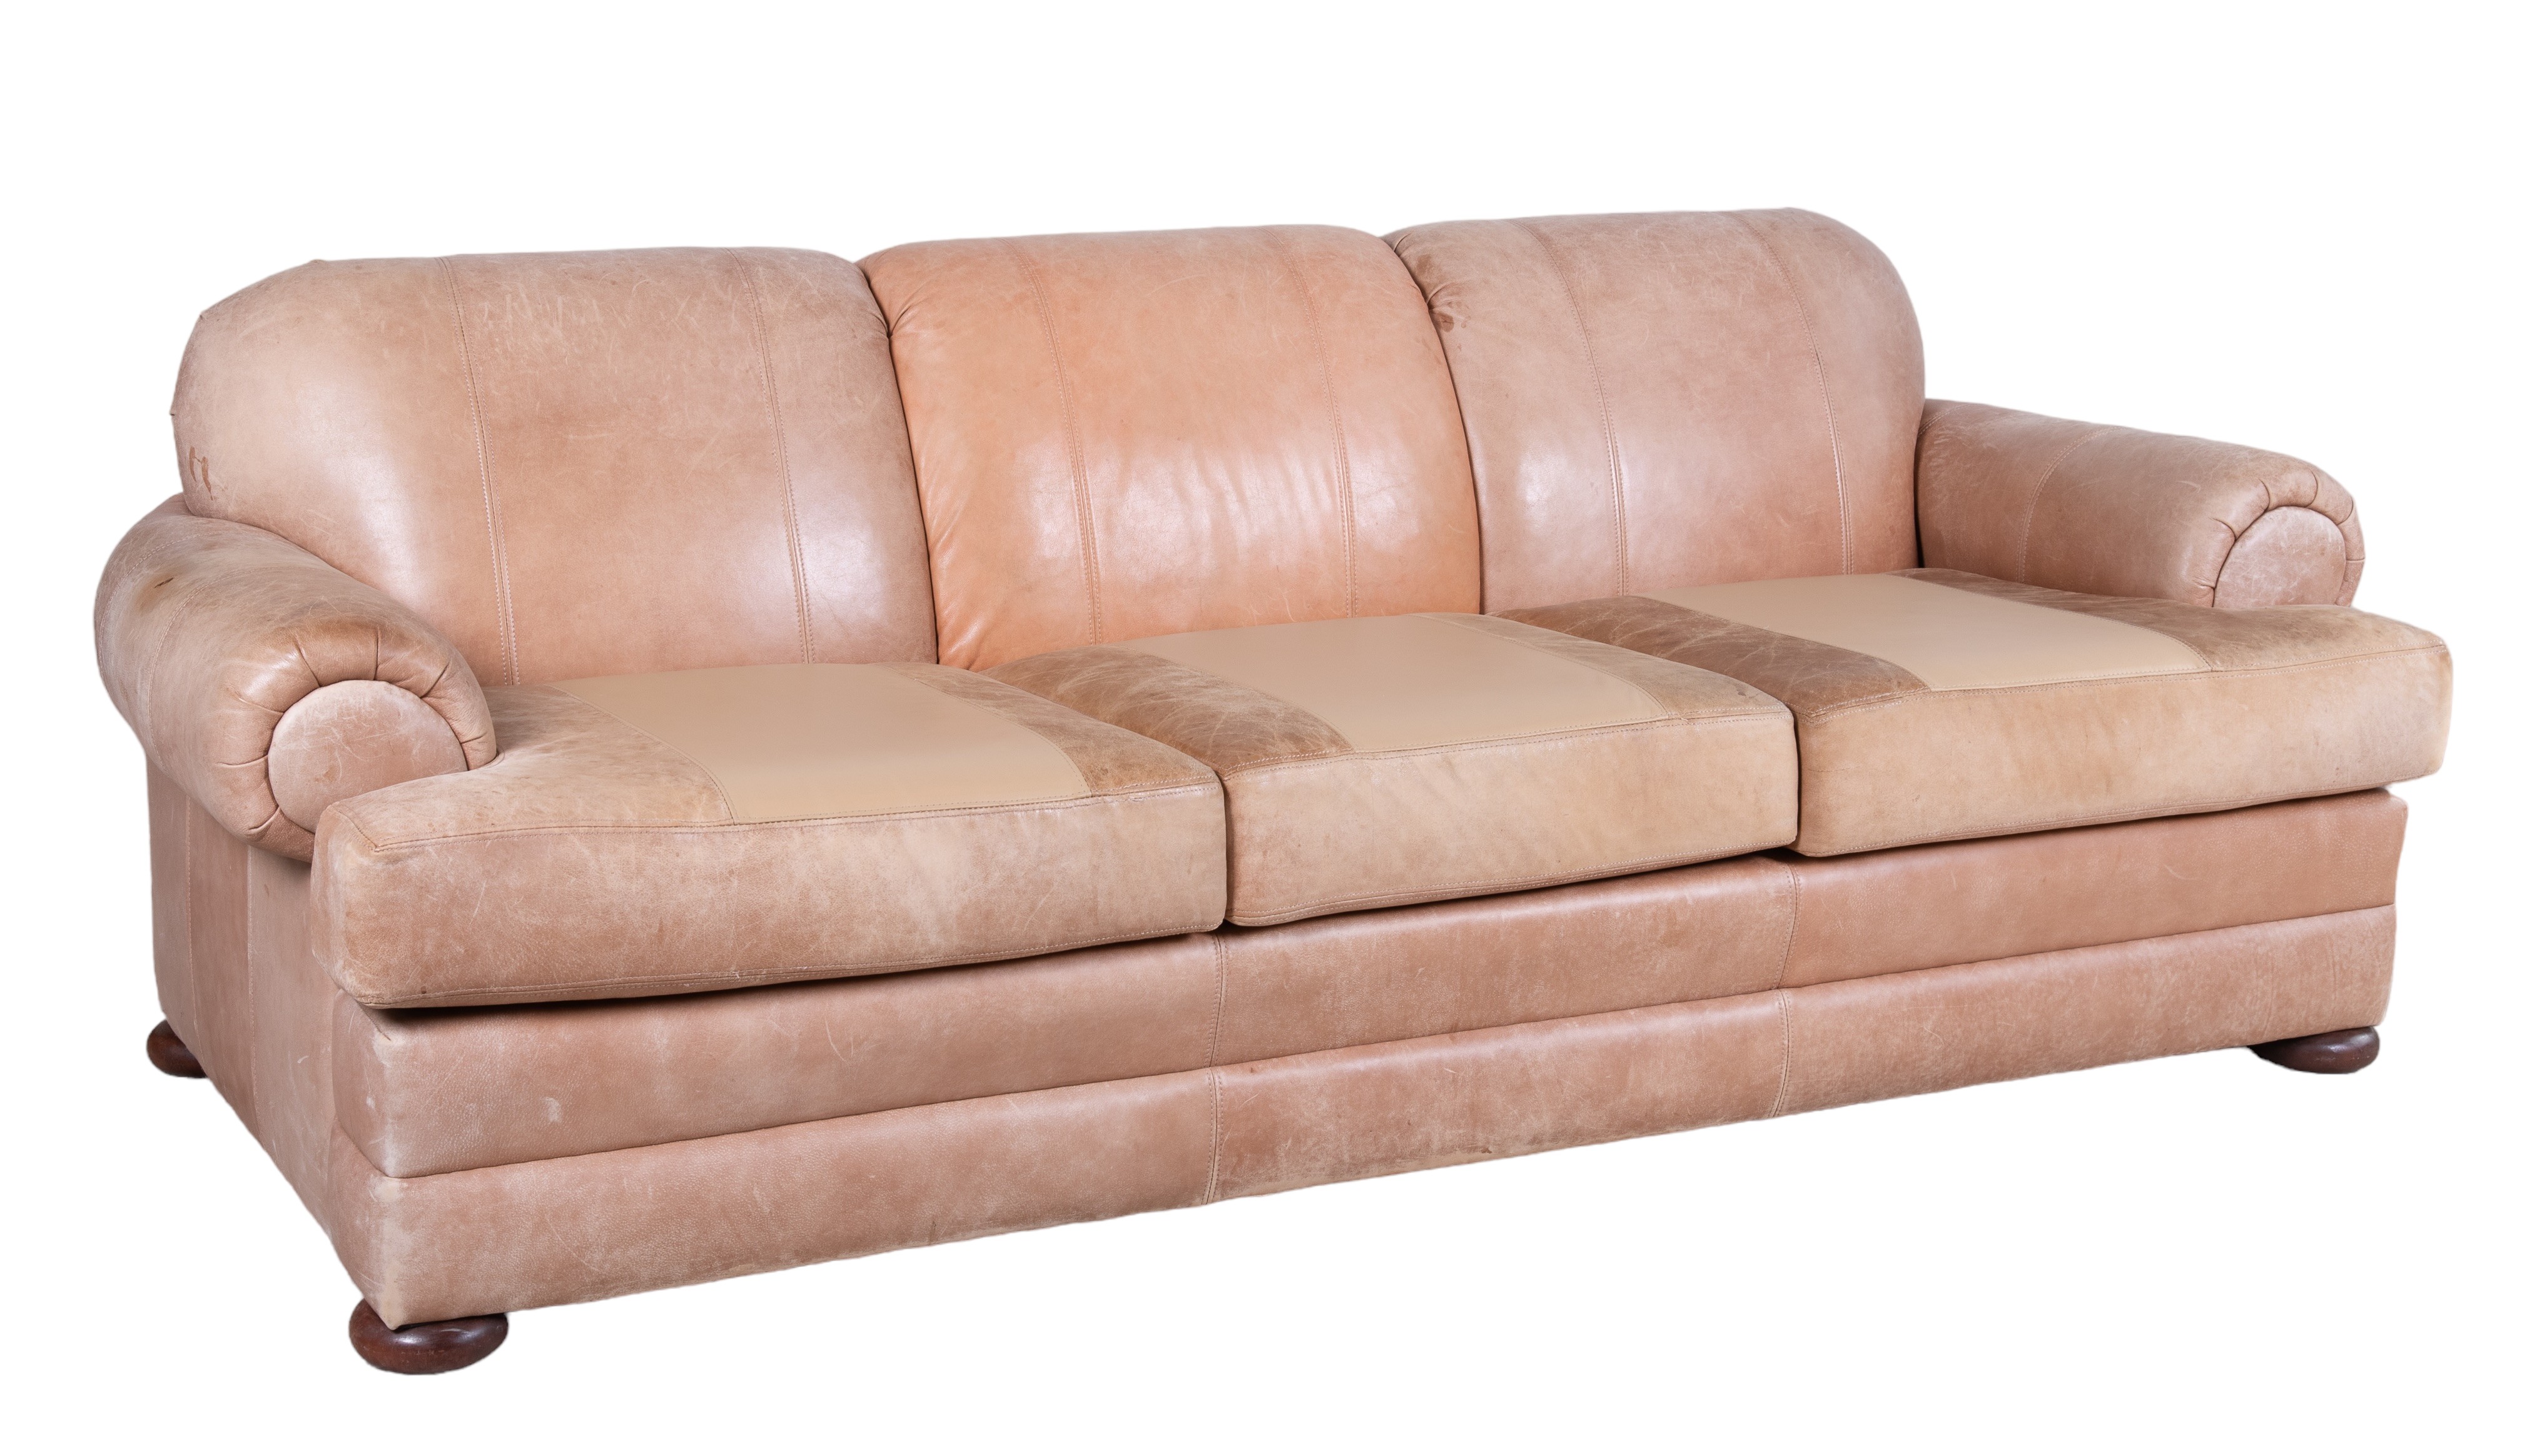 Stitched leather 3 seat sofa camel 3c66a0